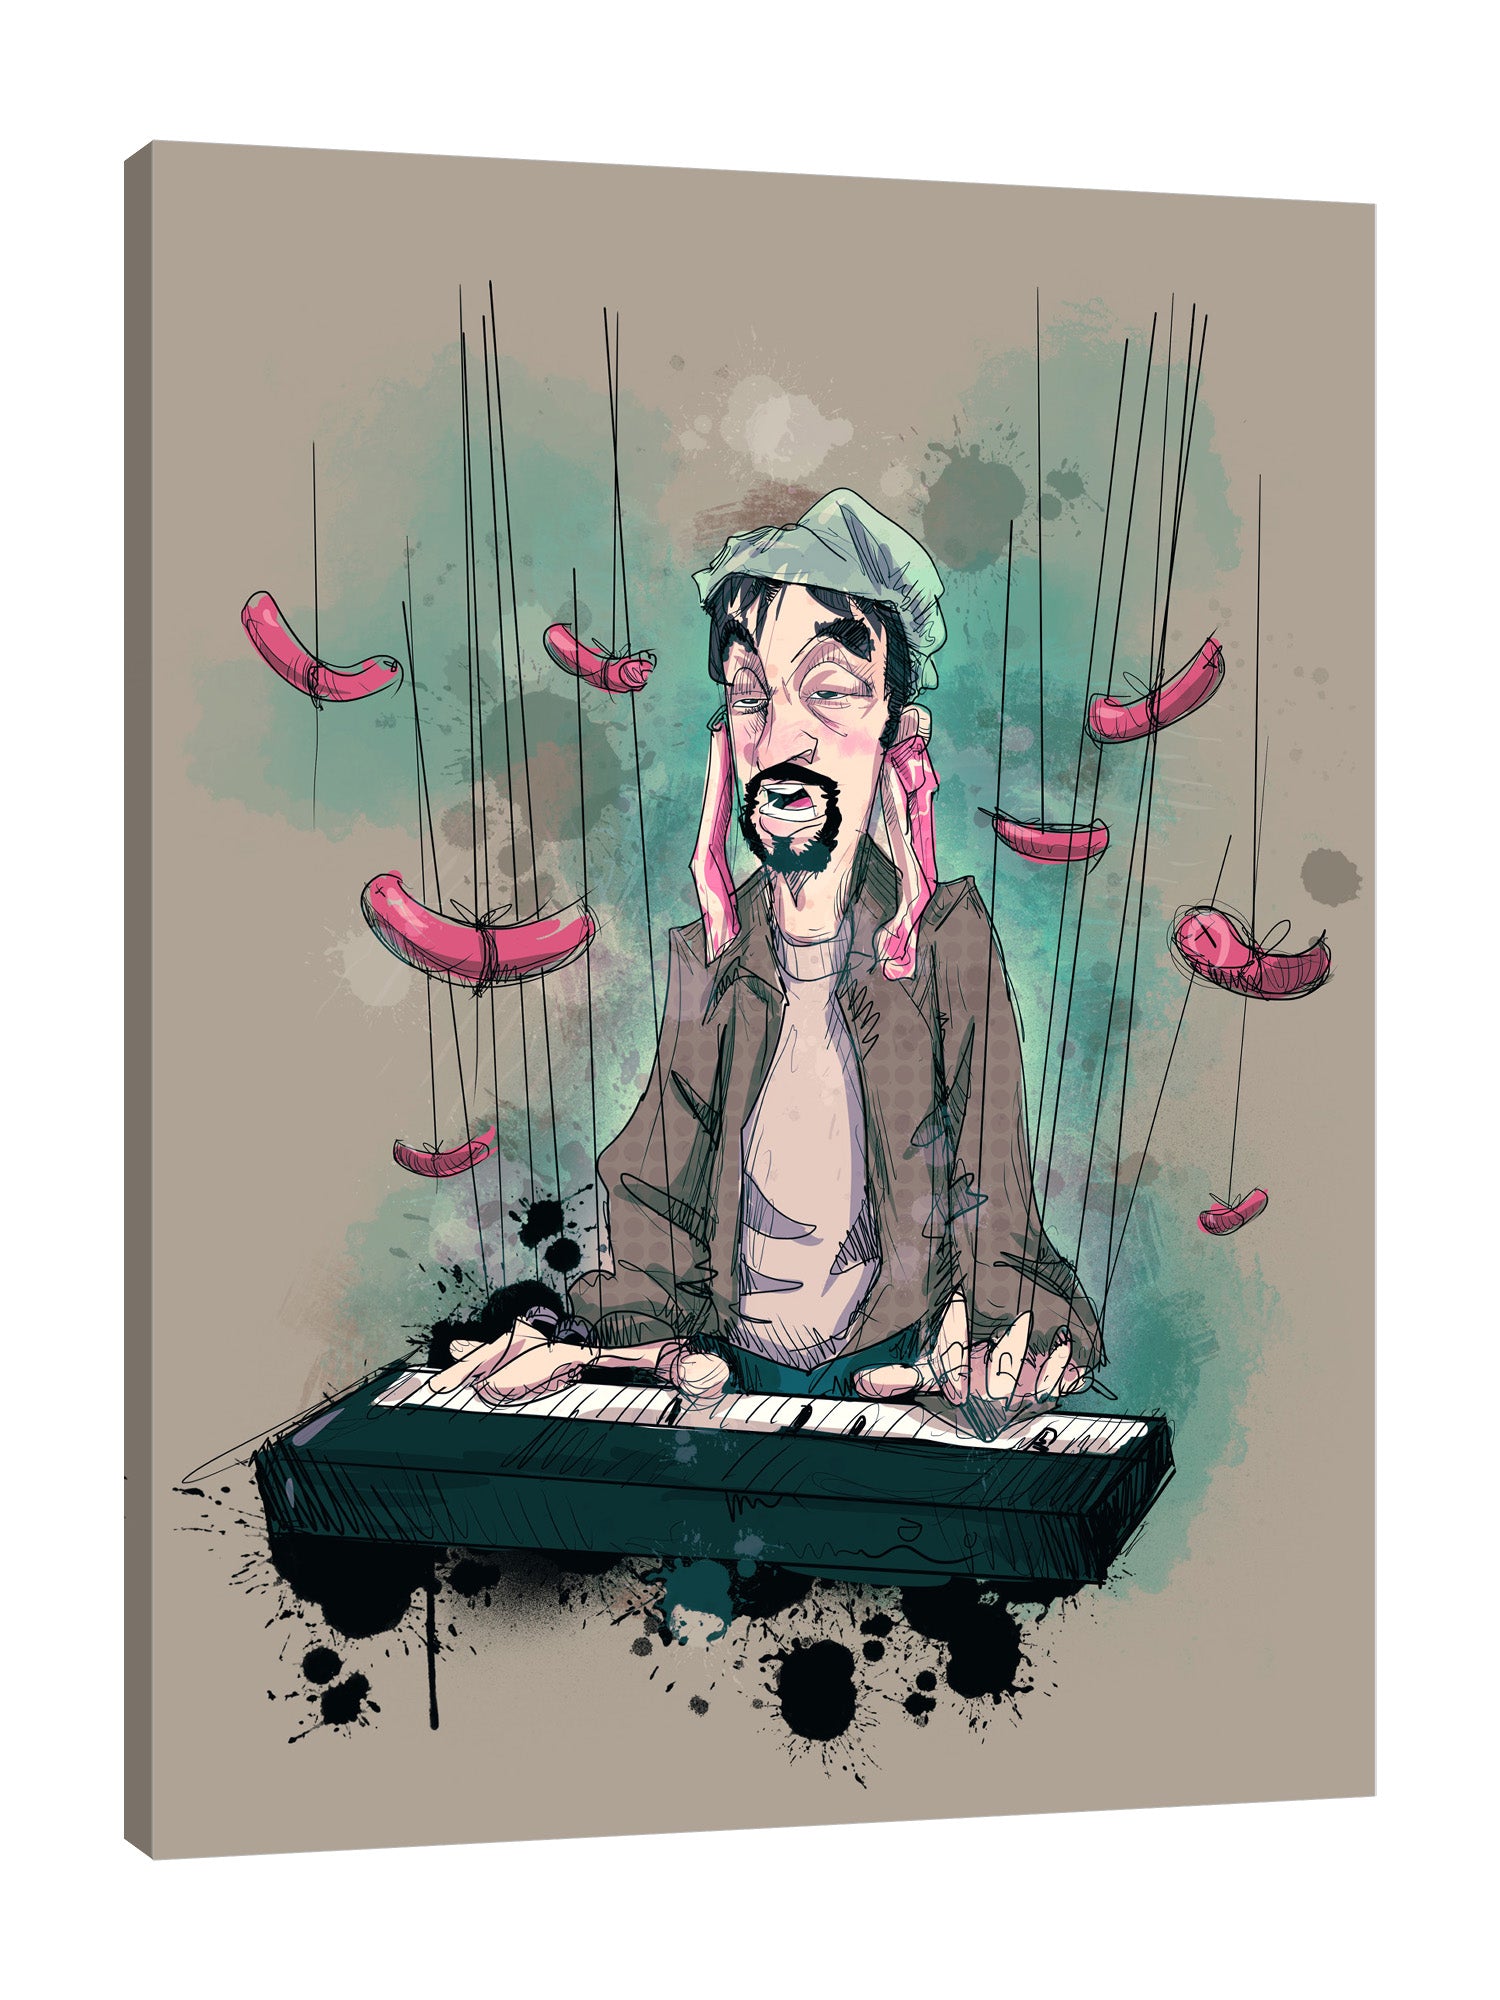 Ludwig-Van-Bacon,Vertical,3X4,Modern & Contemporary,People,Entertainment,Food & Beverage,entertainment,man,daddy,sausage,sausages,food,piano,pianist,musician,music,splatter,splatters,lines,Red,Pale Green,Black,Mint Blue,White,Mist Gray,Gray